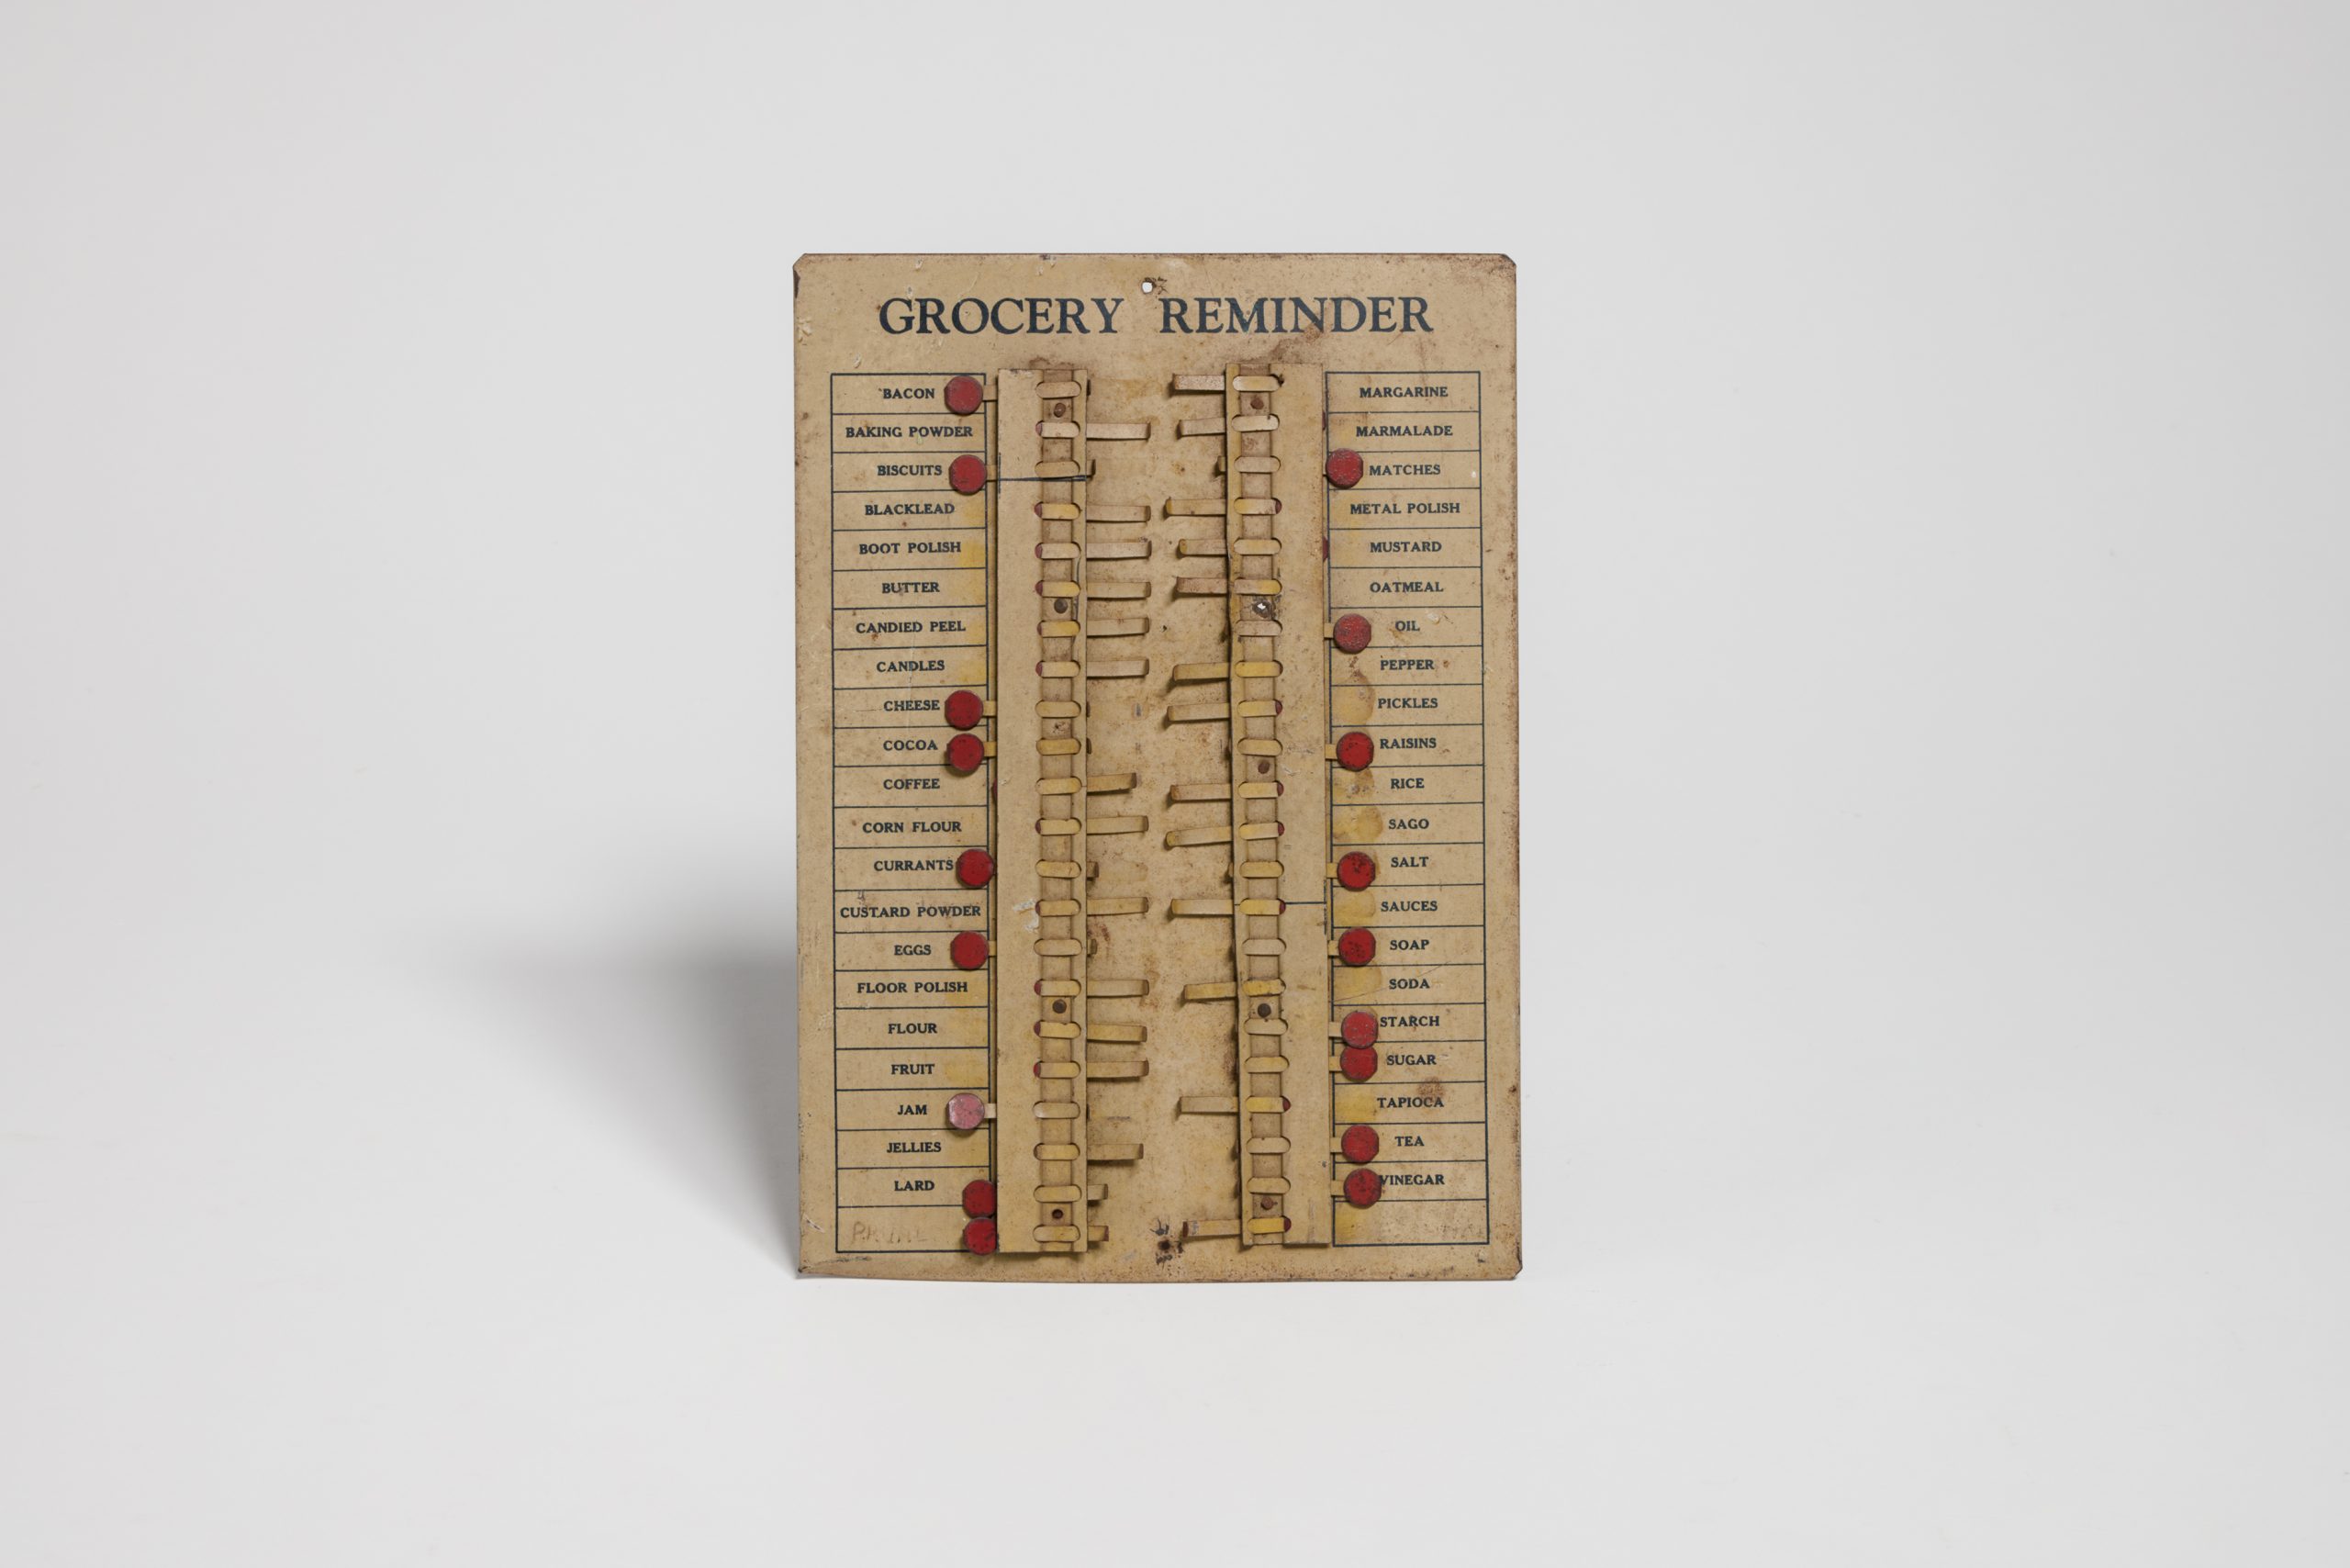 Yellowed paper "GROCERY REMINDER"; lists items like bacon, oil, and cheese; each item has a pull-out tab with a red dot to mark them